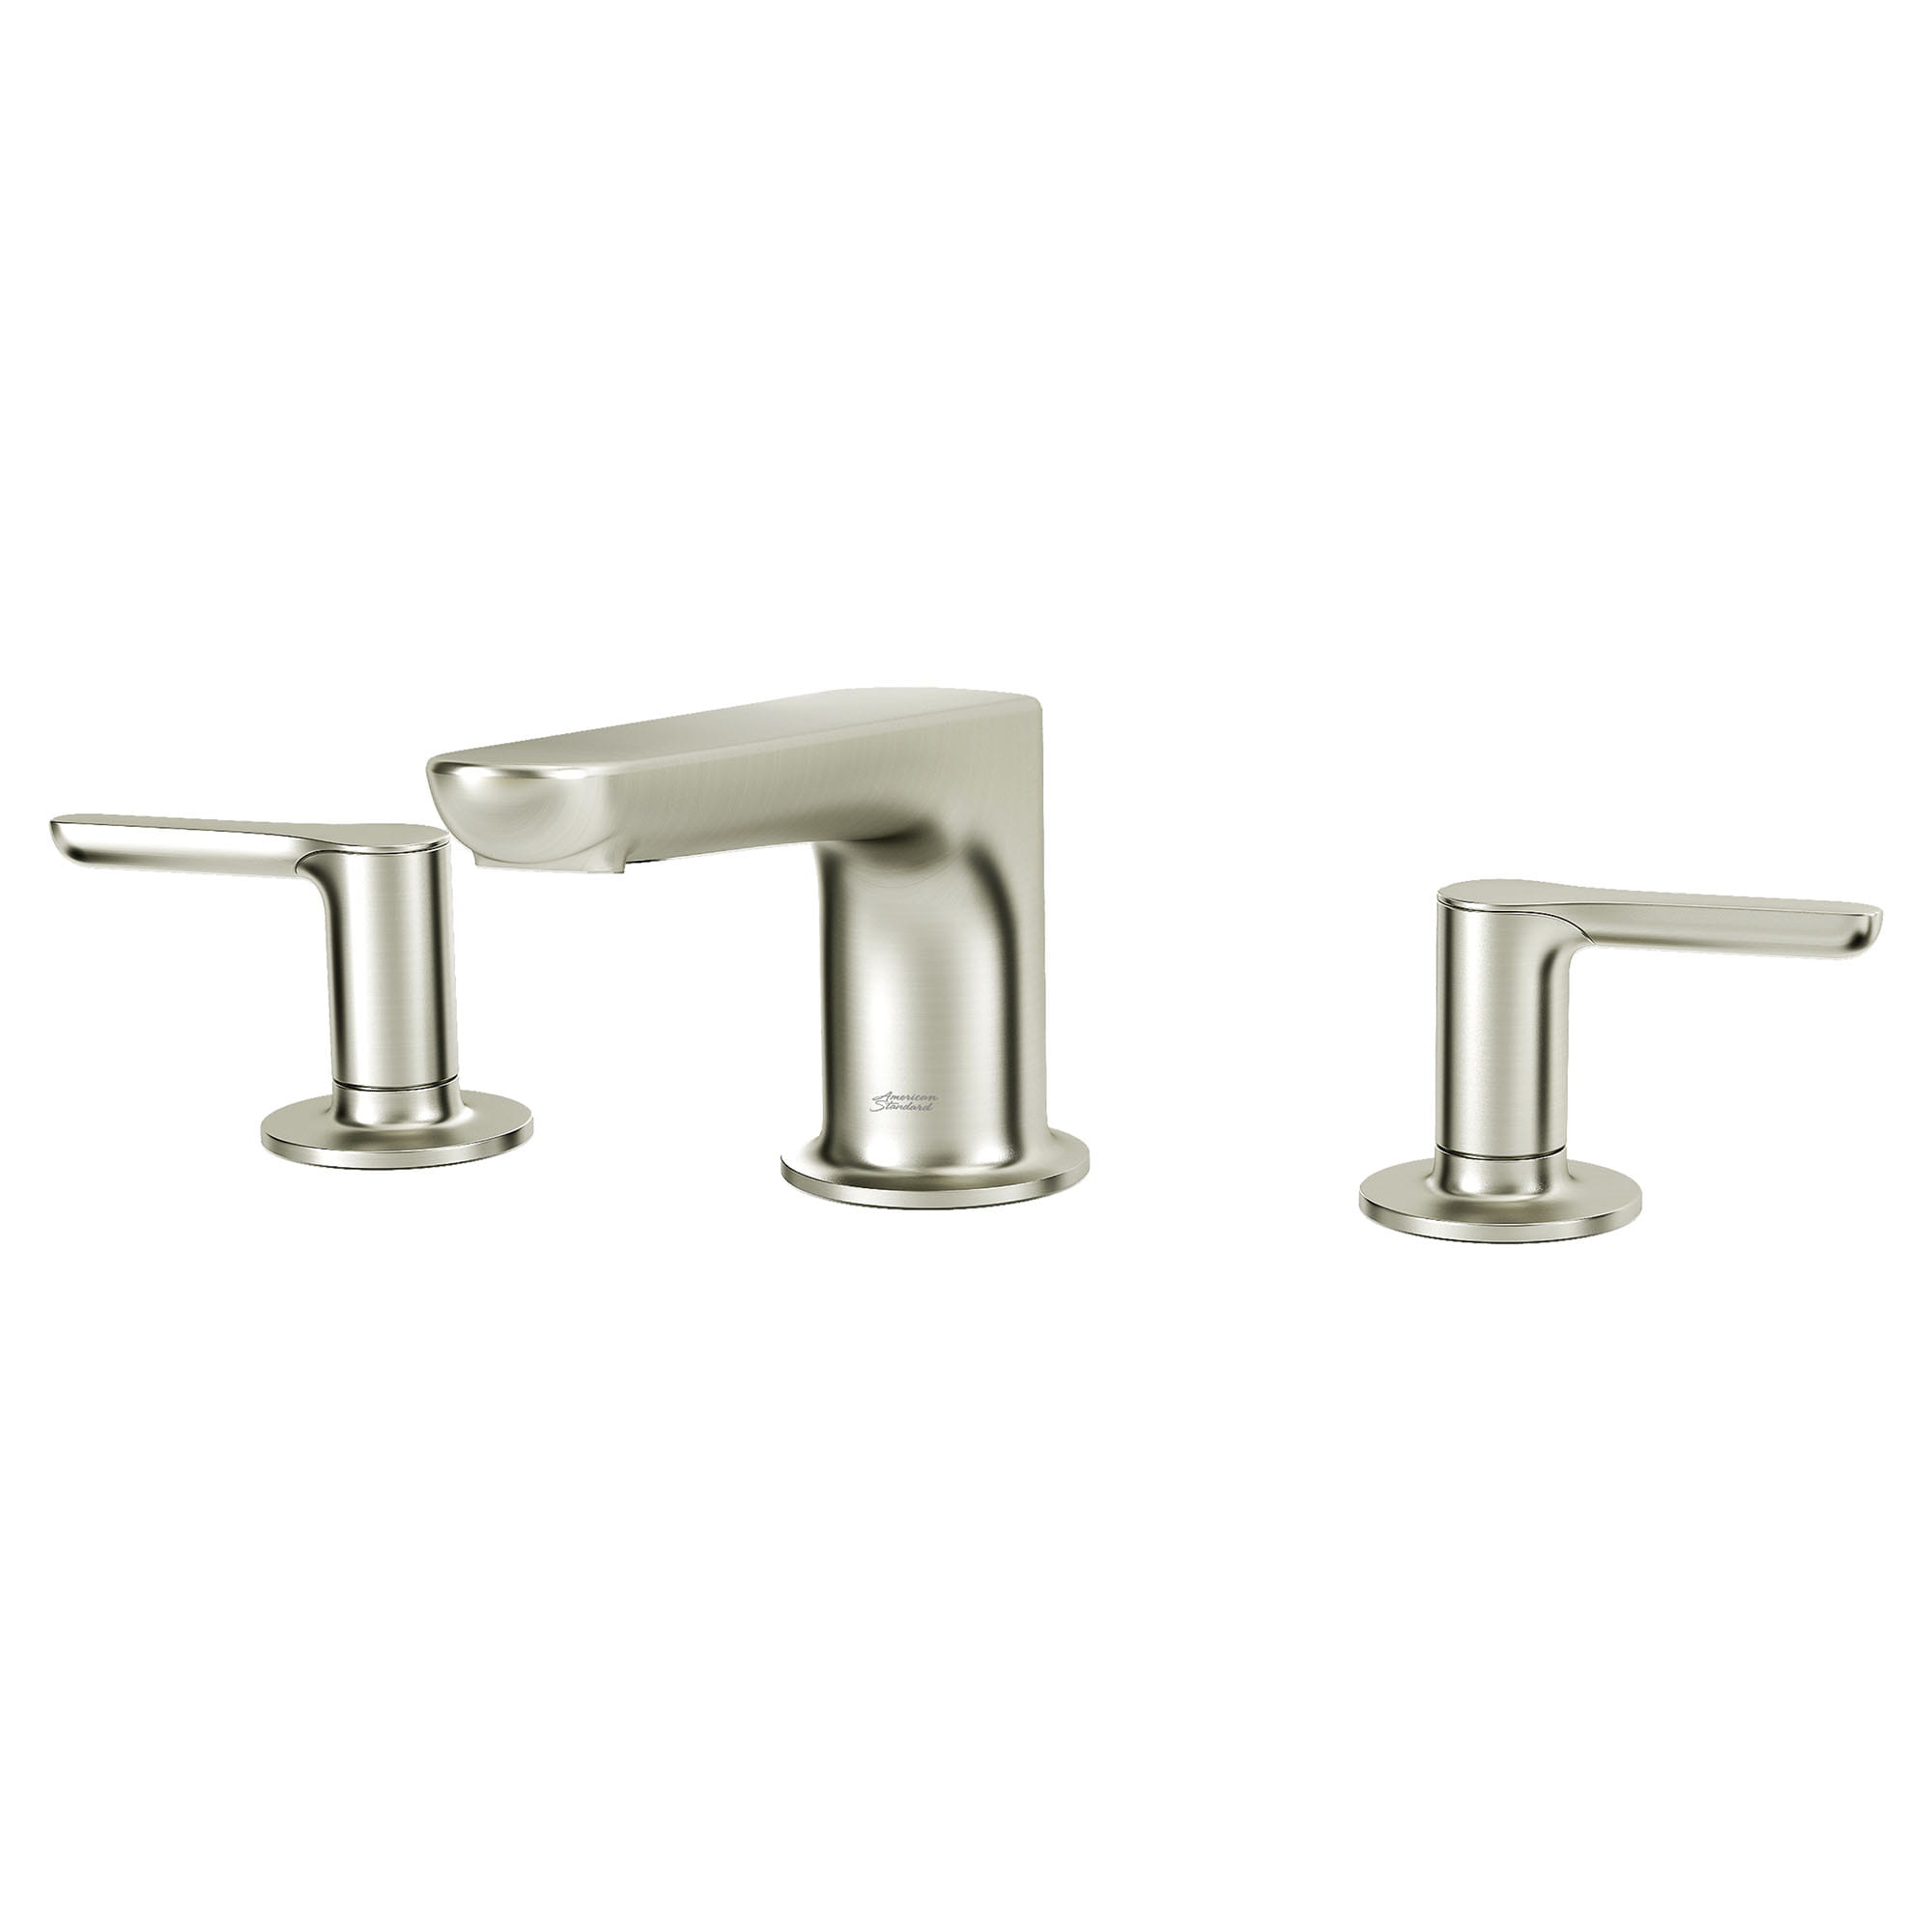 Studio S Bathtub Faucet With Lever Handles for Flash Rough In Valve   BRUSHED NICKEL